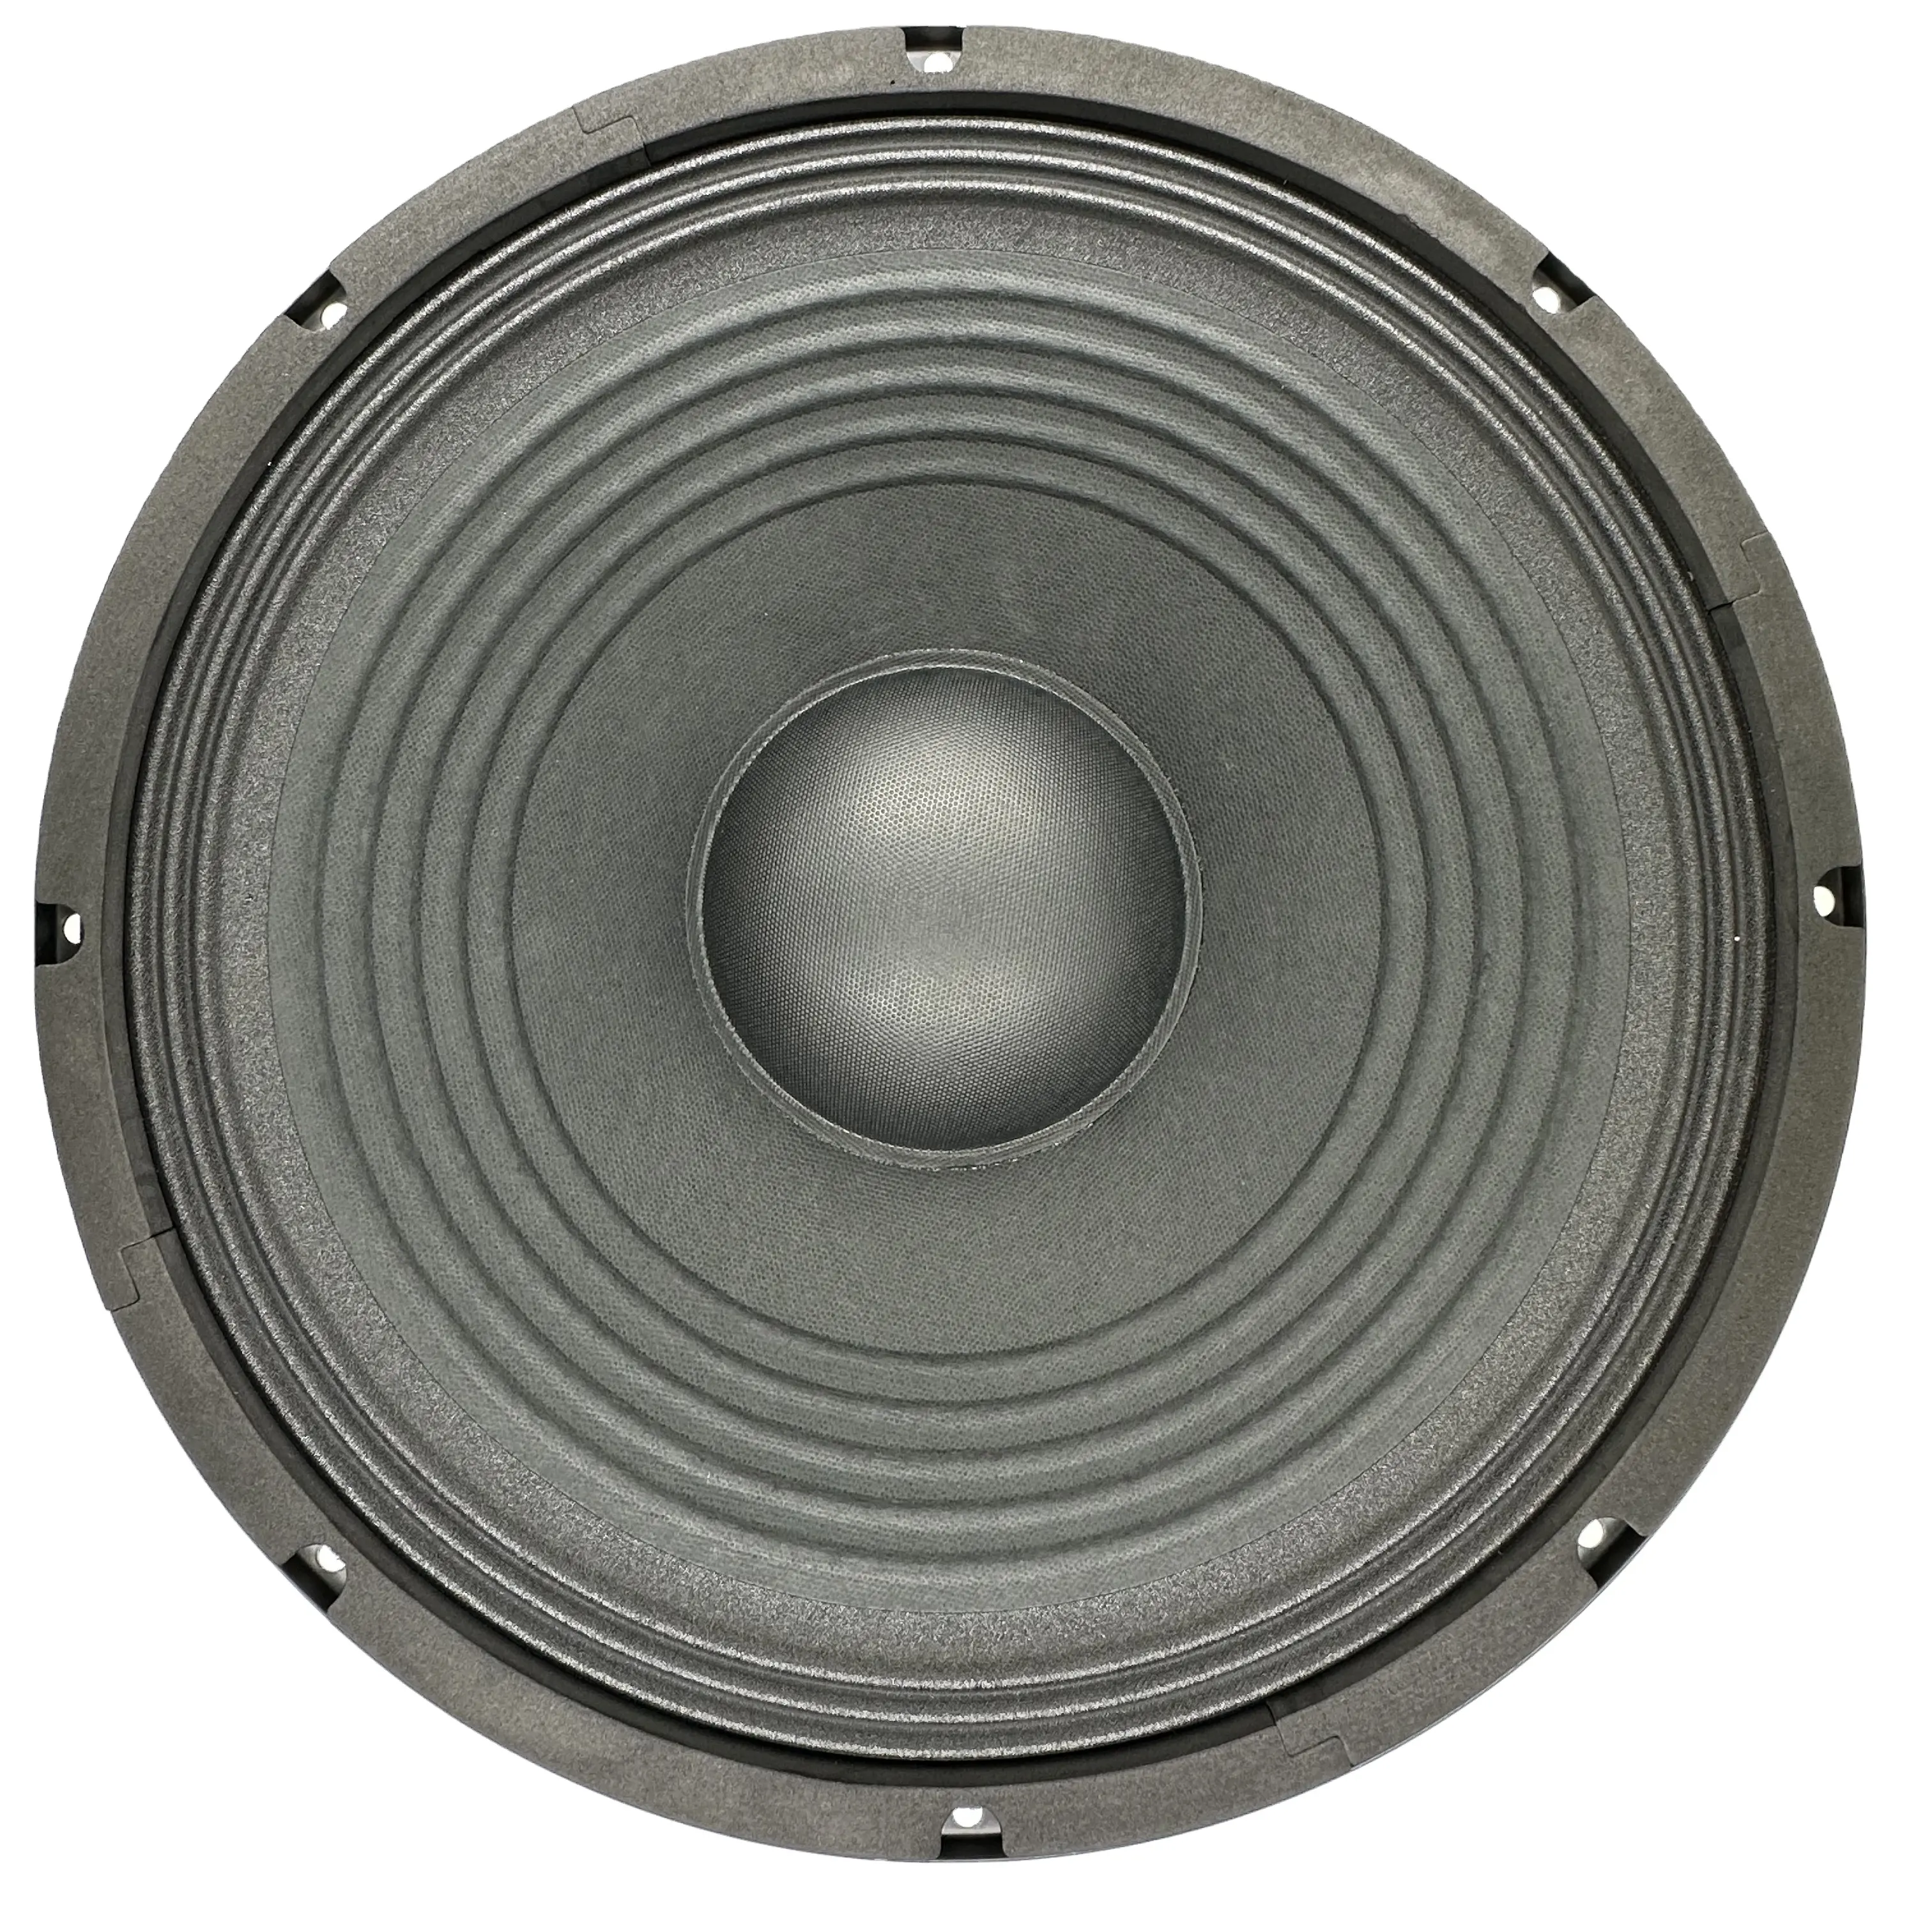 Wholesale 15 inch Woofer Nominal Impedance 8ohm RMS 400W Professional Speakers